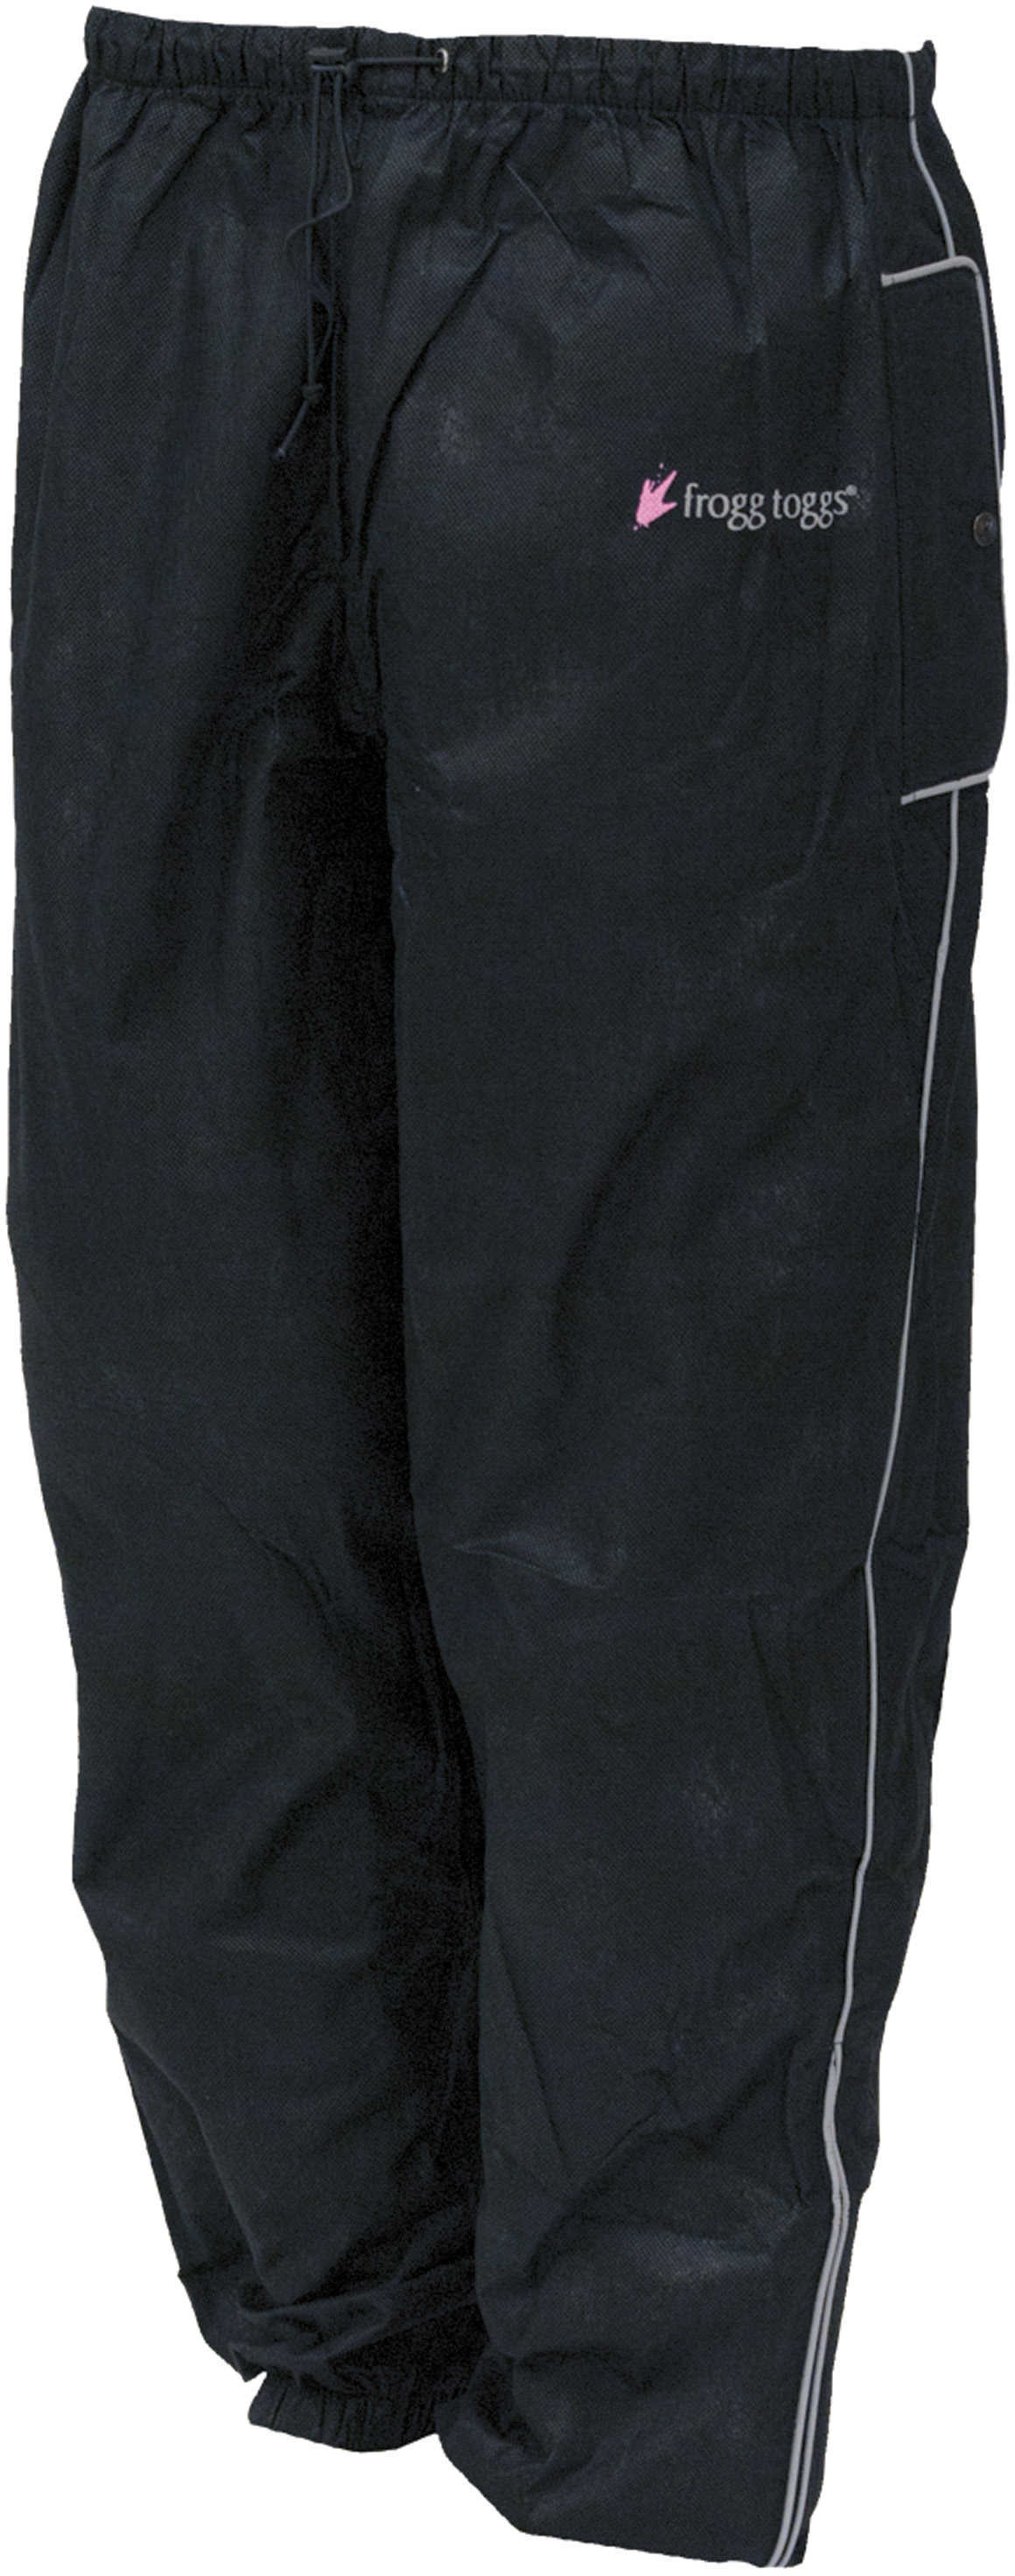 Frogg Toggs Women's Sweet T Pant Black X-Large FT83532-01XL